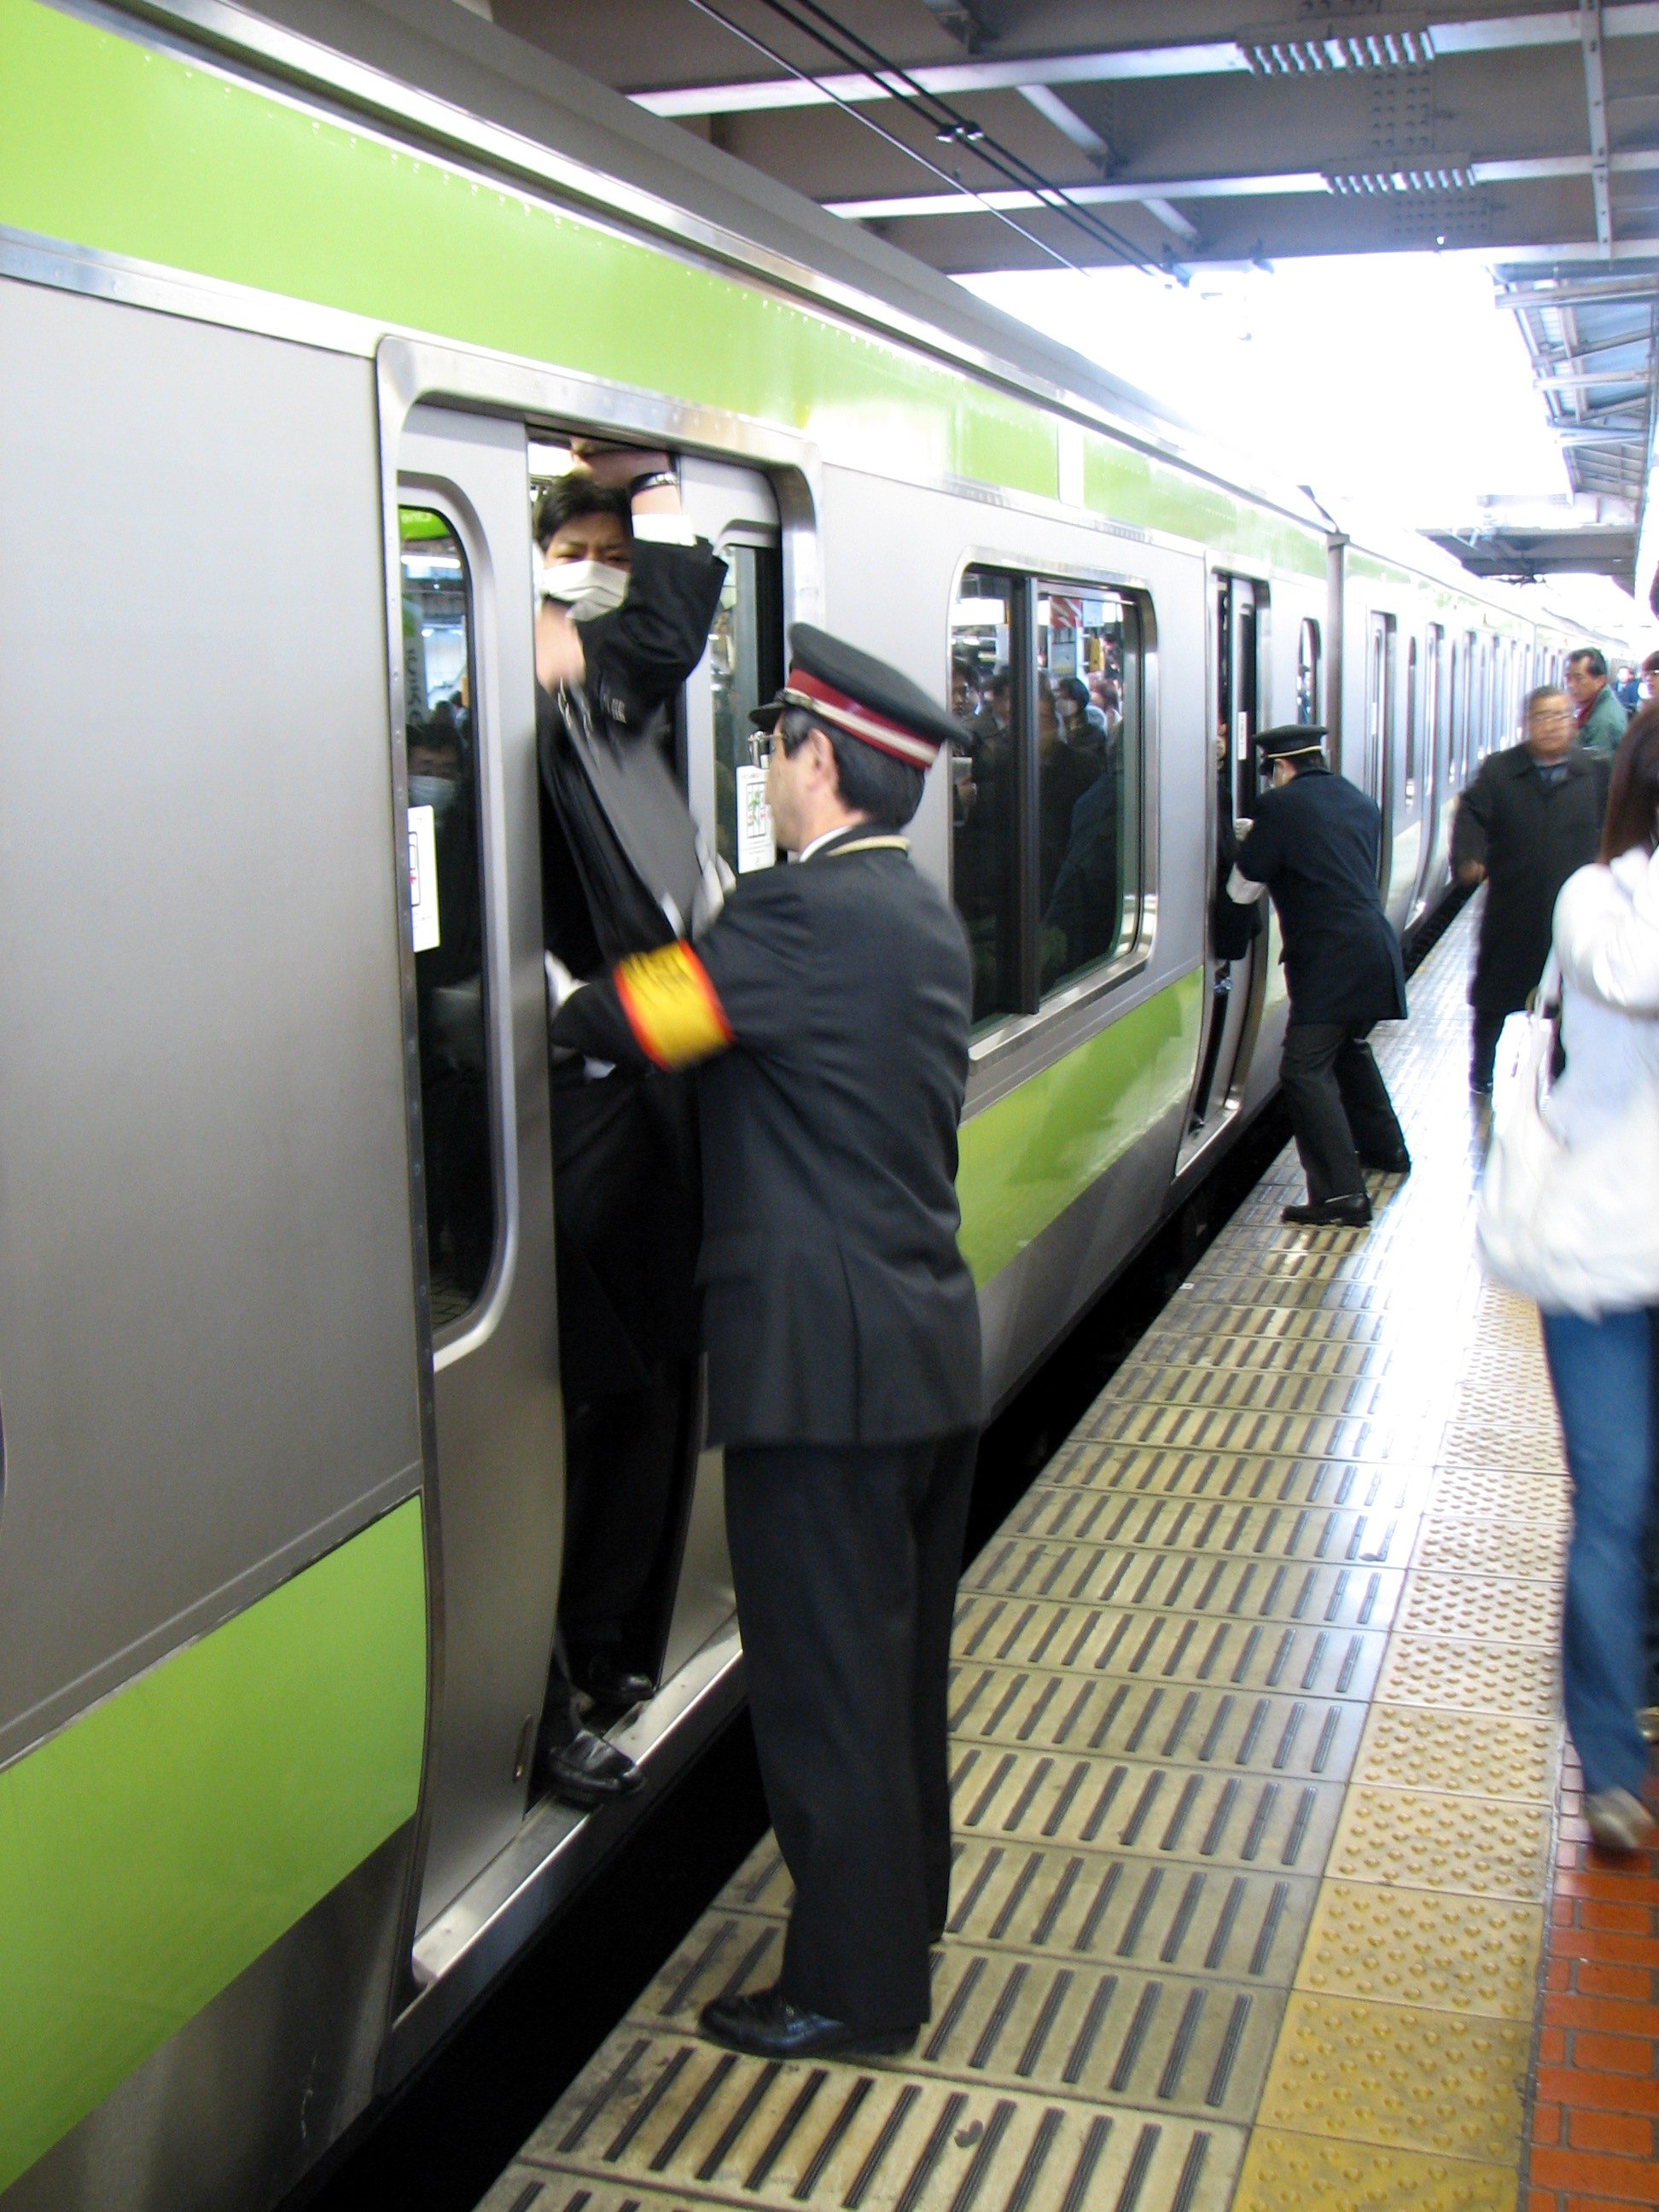 Attendants pushing people onto a train during rush hour at Ueno station, Yamanote line.